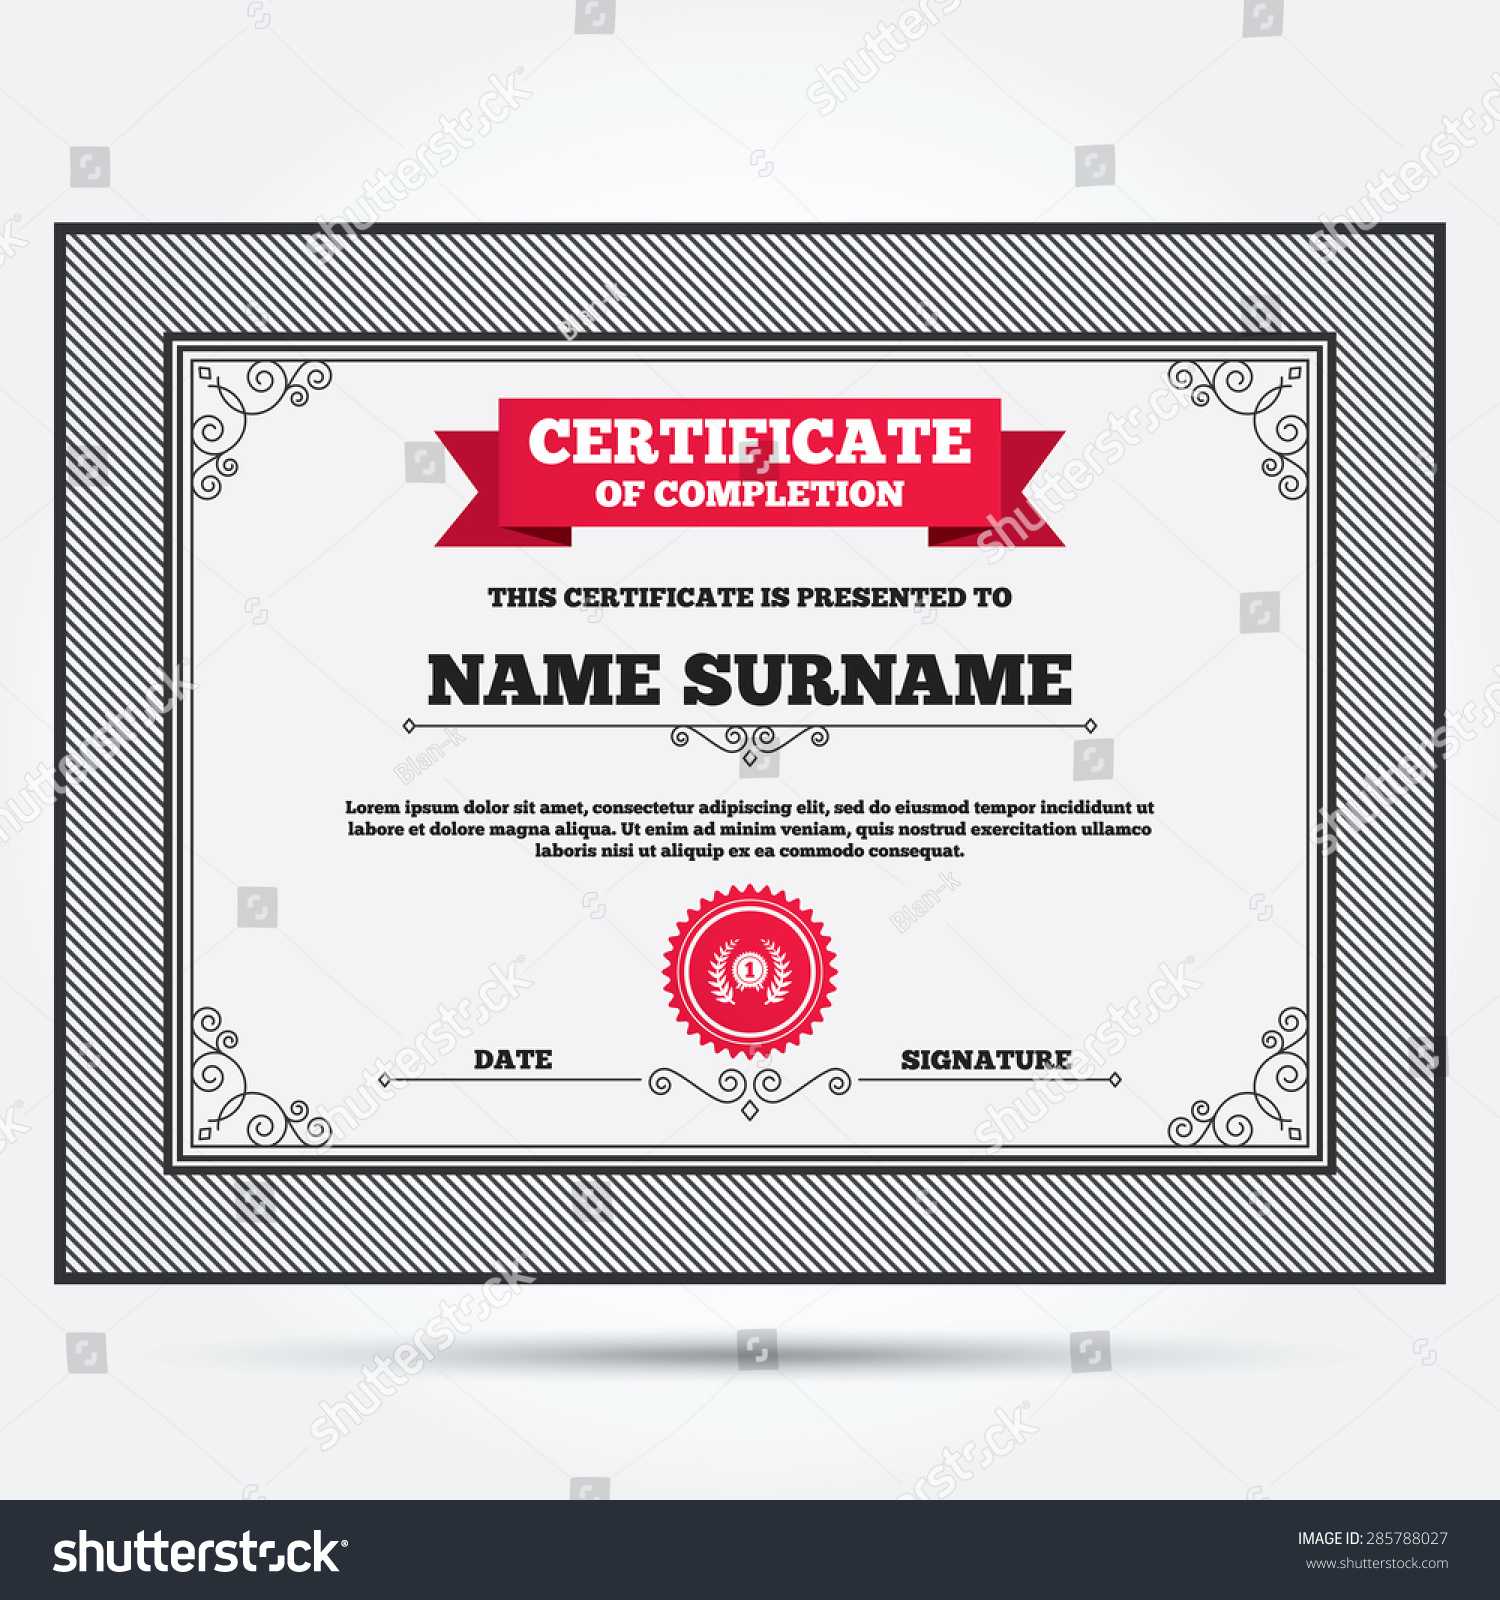 Certificate Completion First Place Award Sign Stock Vector For First Place Certificate Template